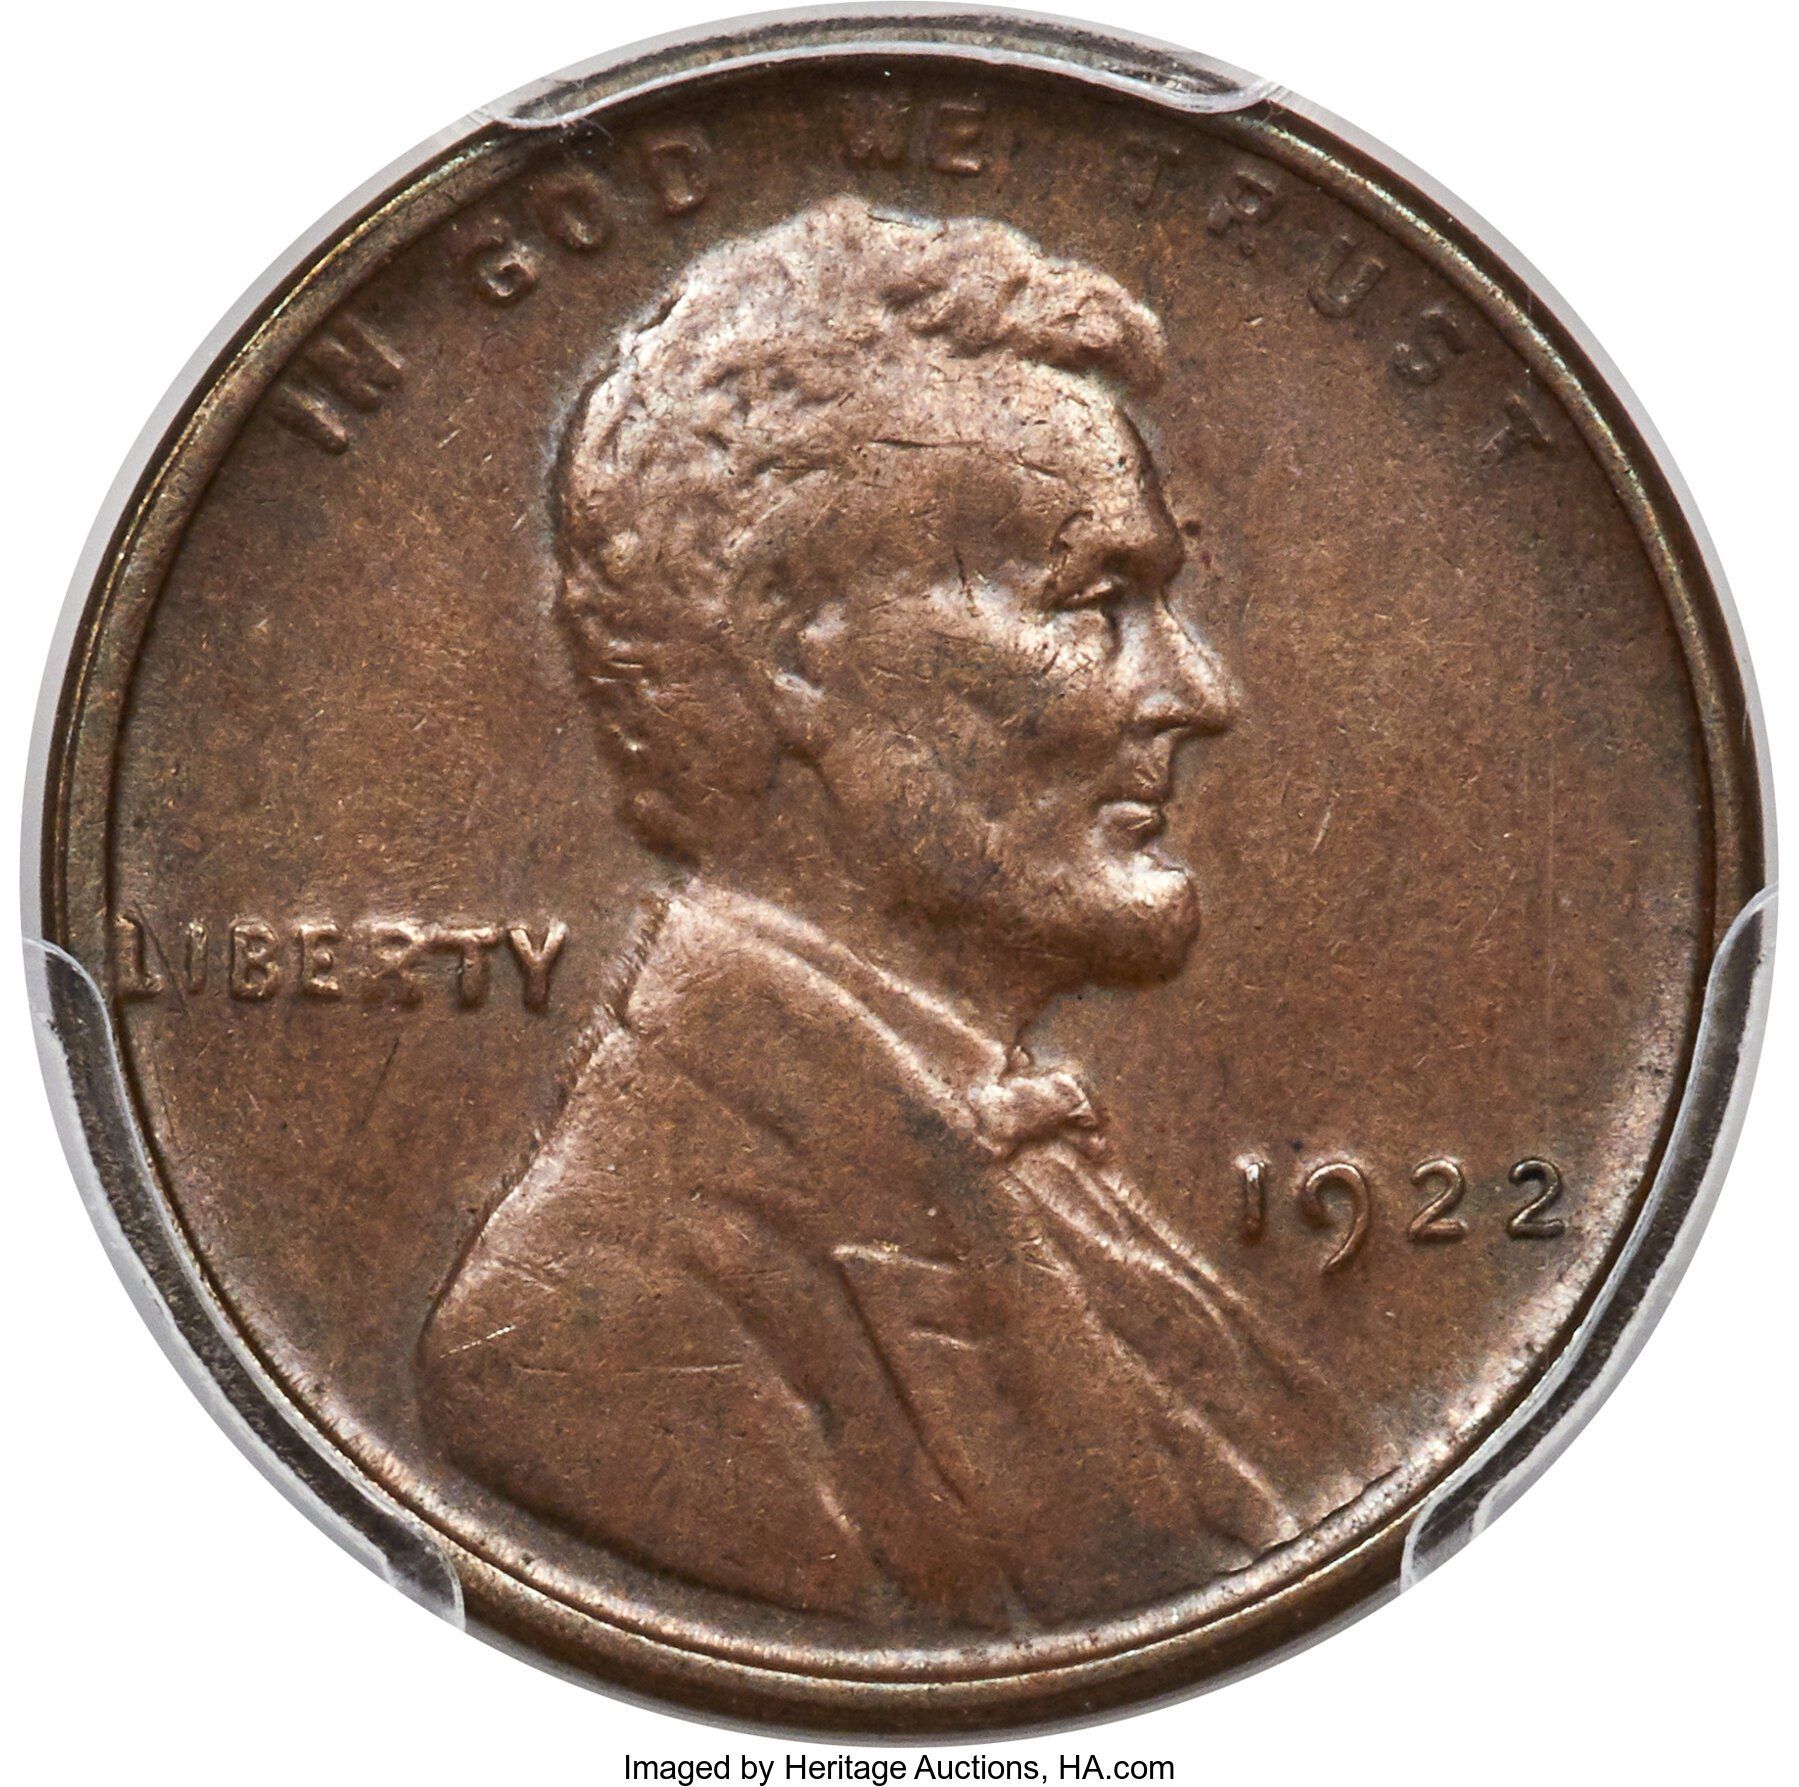 1922 d no di lincoln wheat cent imaged by Heritage Auctions, HA.com